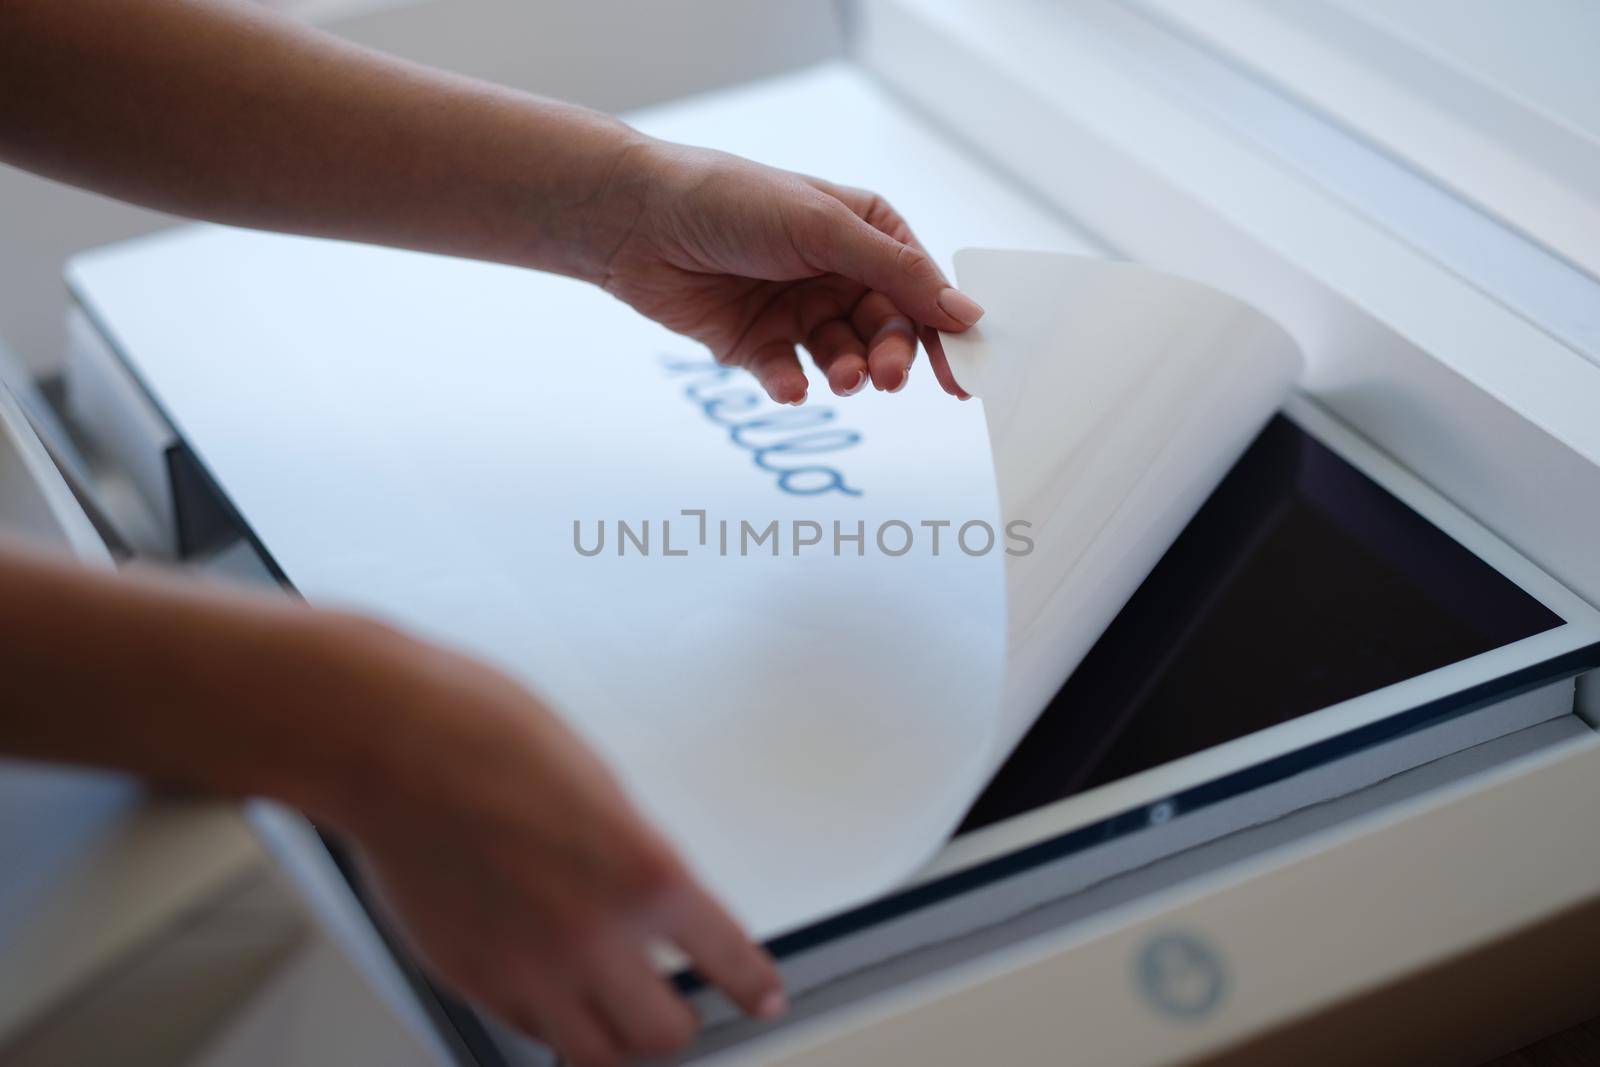 Tbilisi, Georgia - April 11, 2022: Woman removing protective film from New iMac monitor by kuprevich